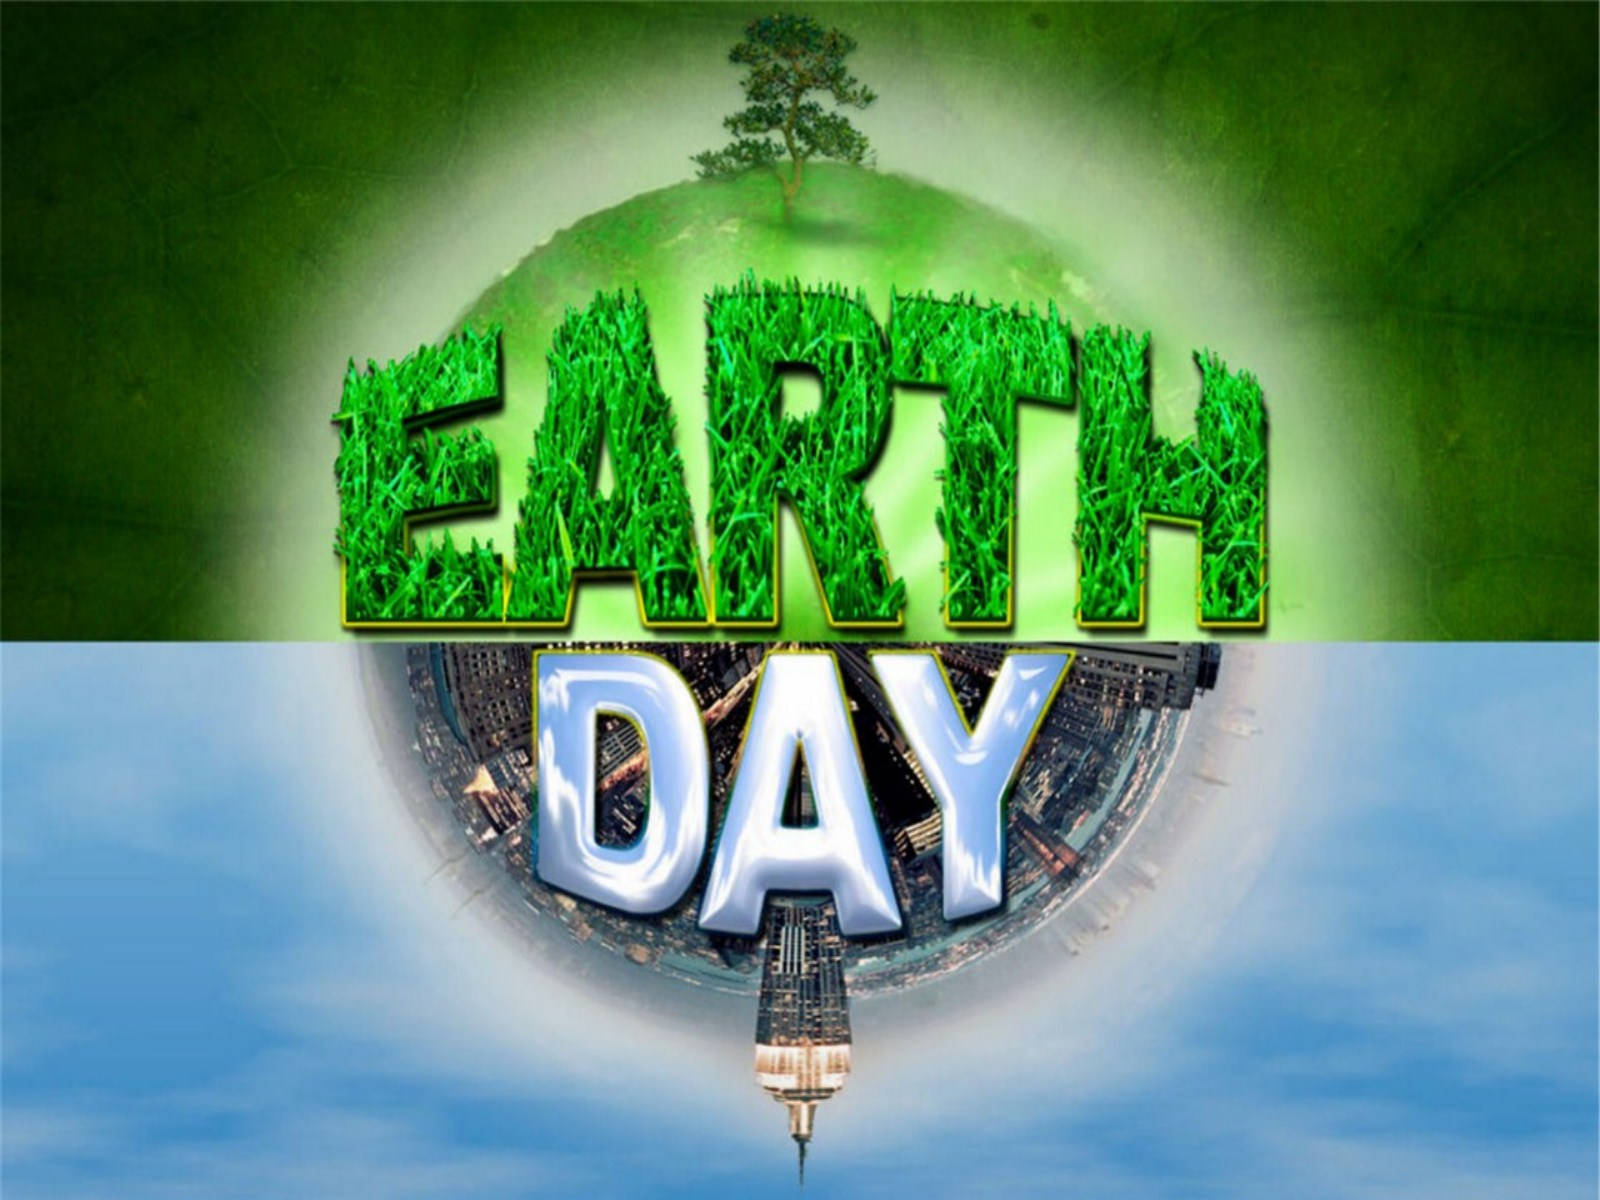 Earth Day Wallpapers